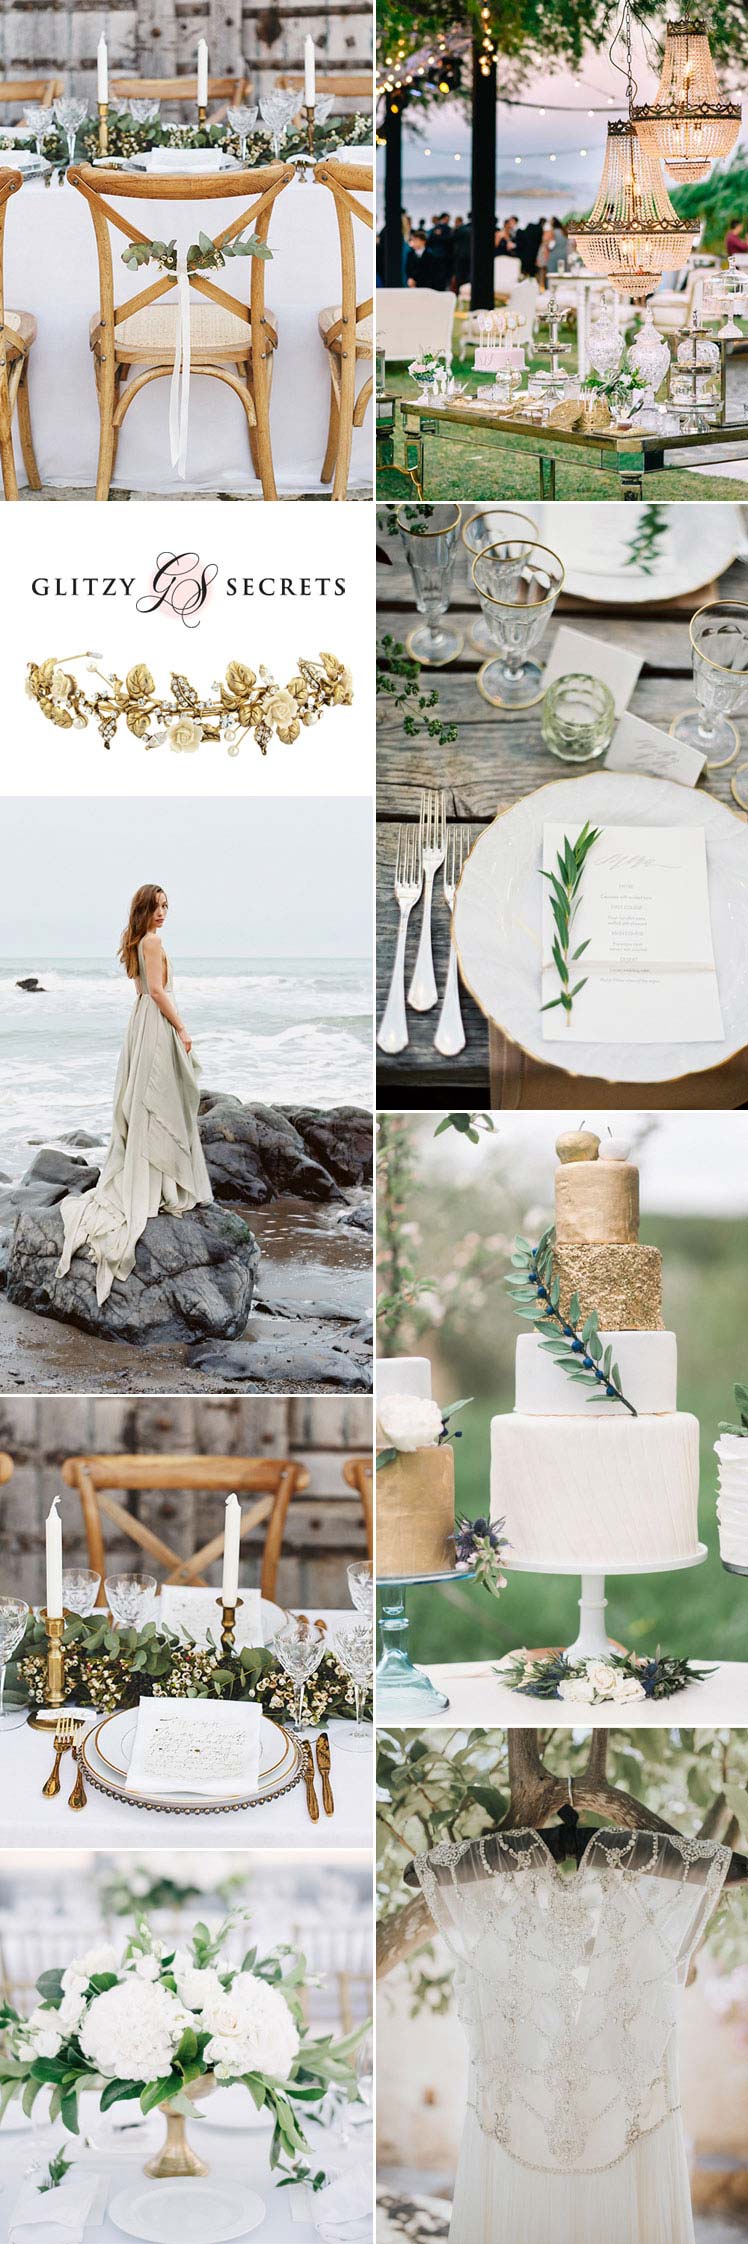 Grecian wedding theme ideas for your special day